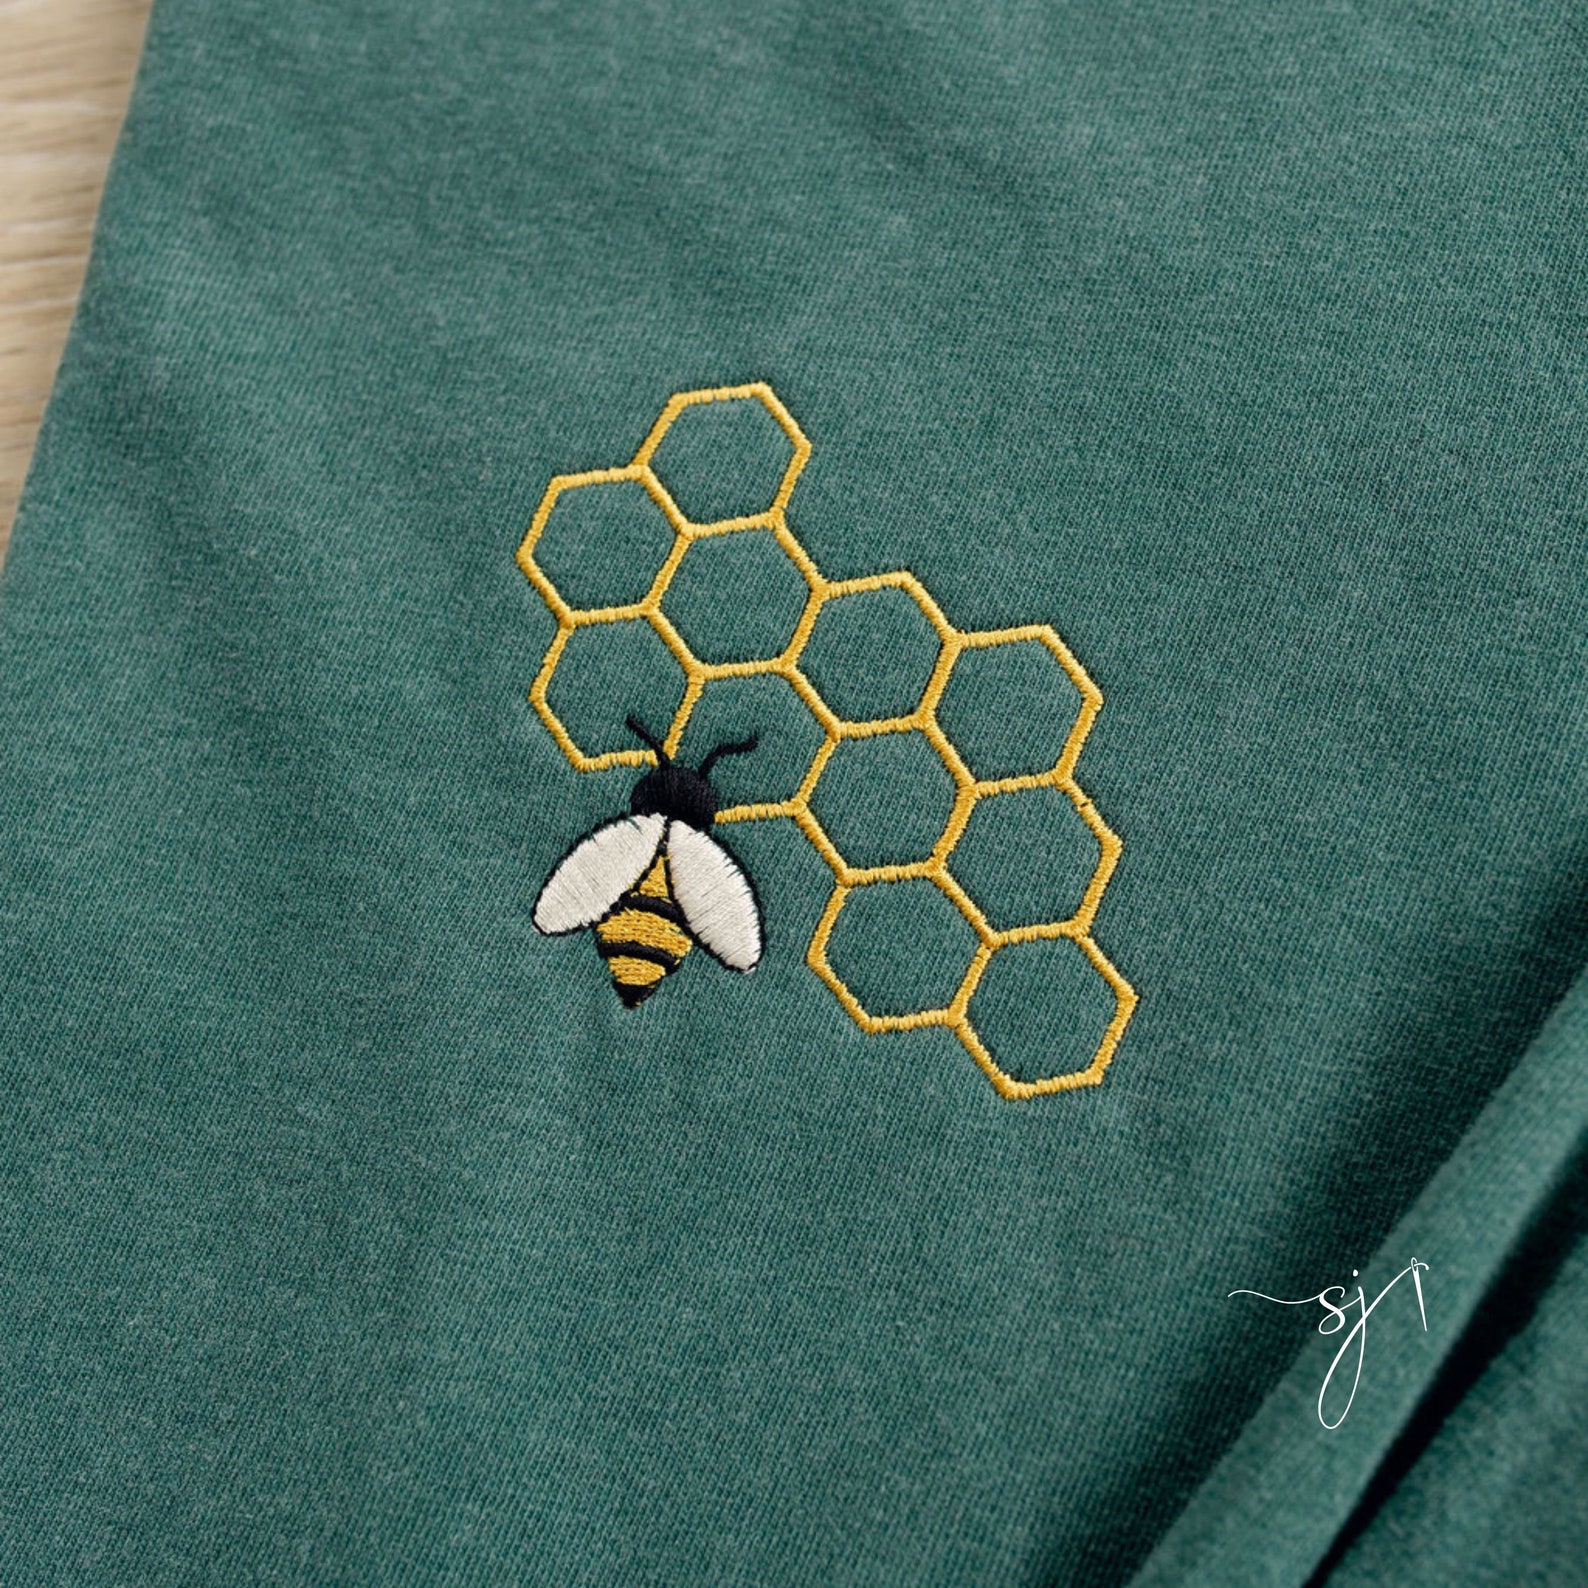 Honeycomb Honeybee Embroidered Comfort Colors Dark Green and - Etsy